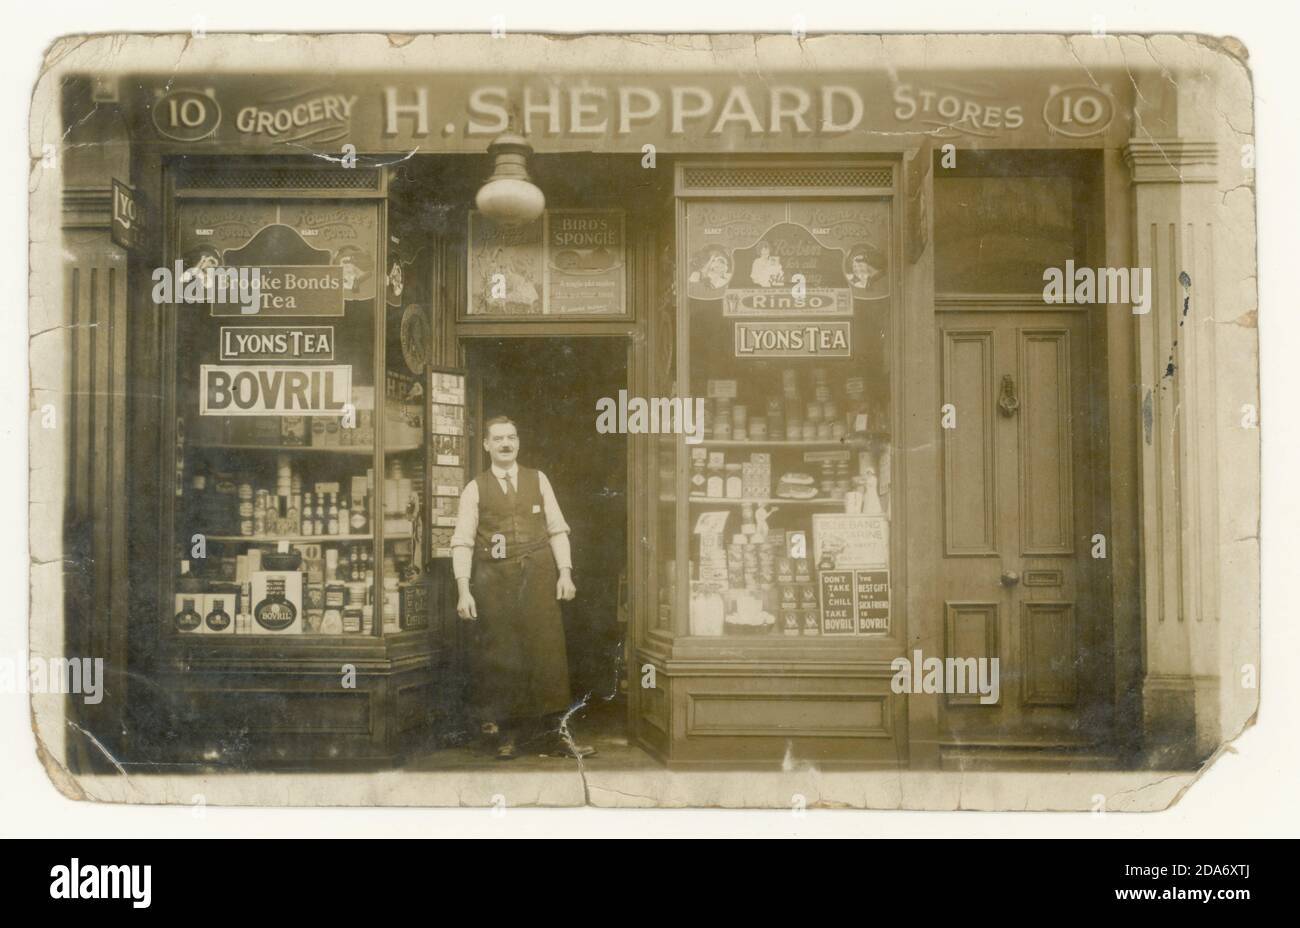 Original WW1 era postcard of Grocery store with many well known brand names in the shop window display adverts:   Rowntree's, Rinso, Lyons Tea, Brooke Bonds Tea, Bovril, Bird's Spongie (cake mix)  Blue Band Margarine, HP Sauce, and Quaker Oats -  The proprietor is  H. Sheppard, circa 1917, 1918,  Erdington, Birmingham, England, U.K. Stock Photo